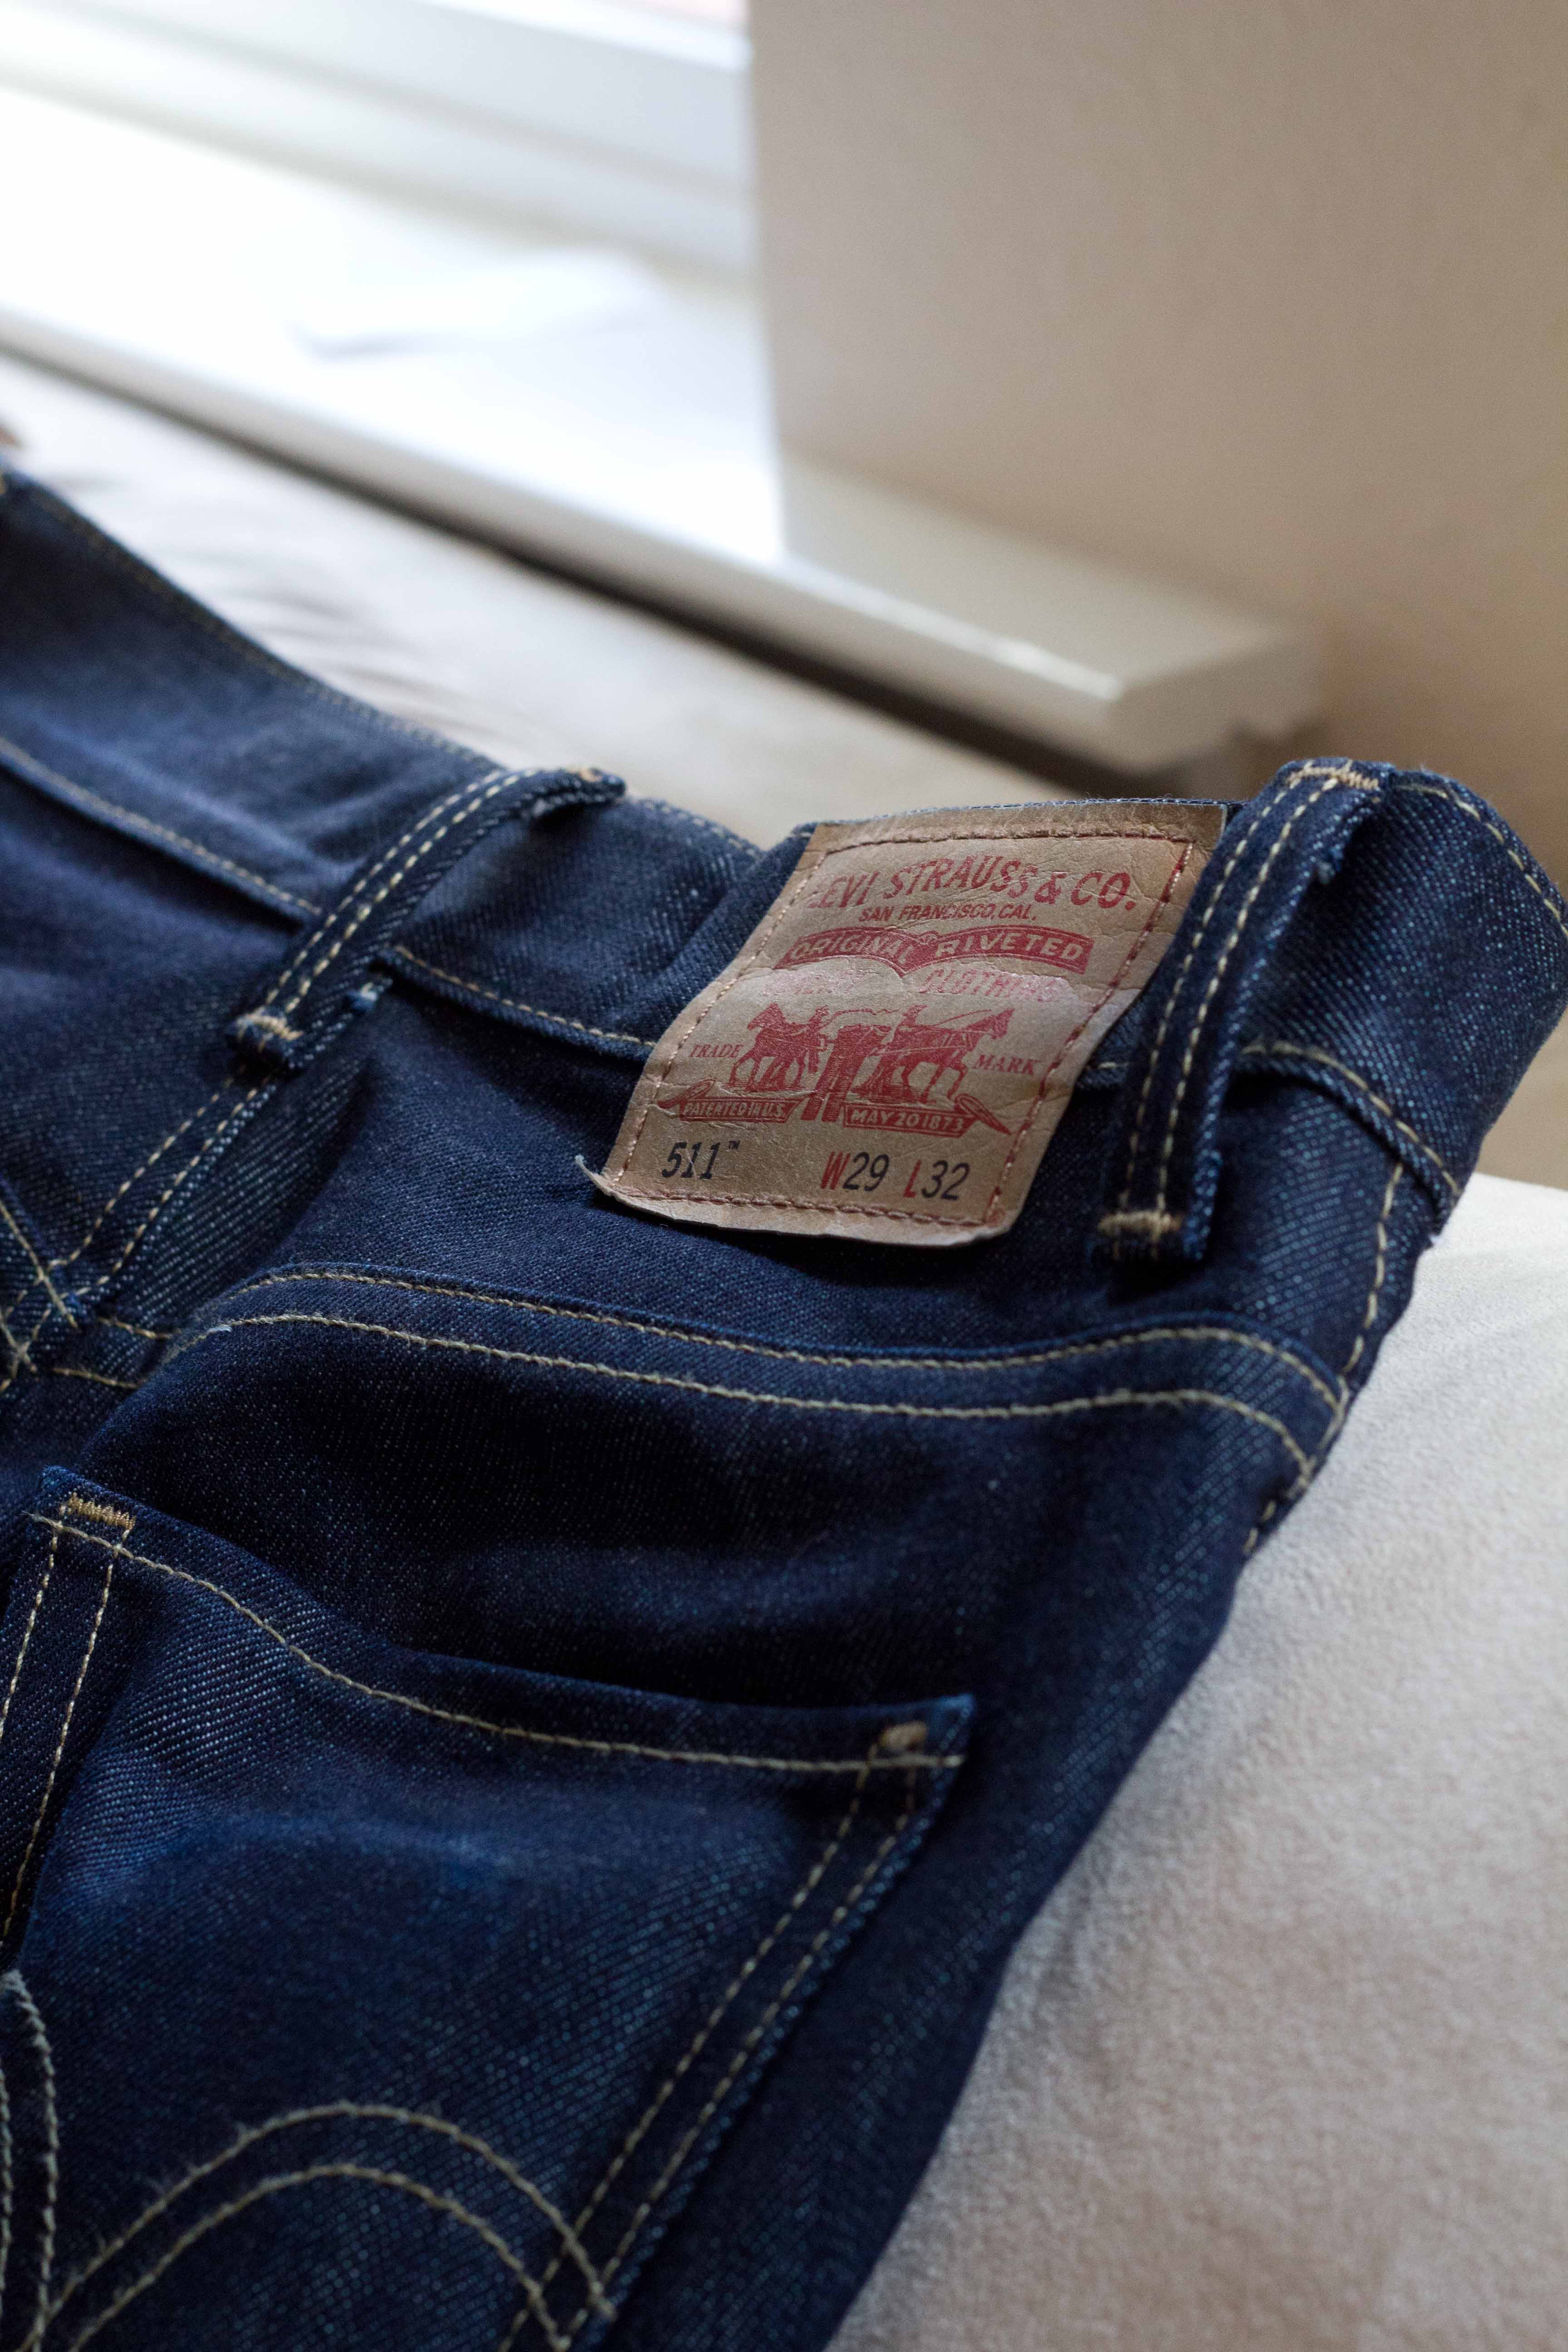 Do you remove the patch from a new set of jeans? | Styleforum